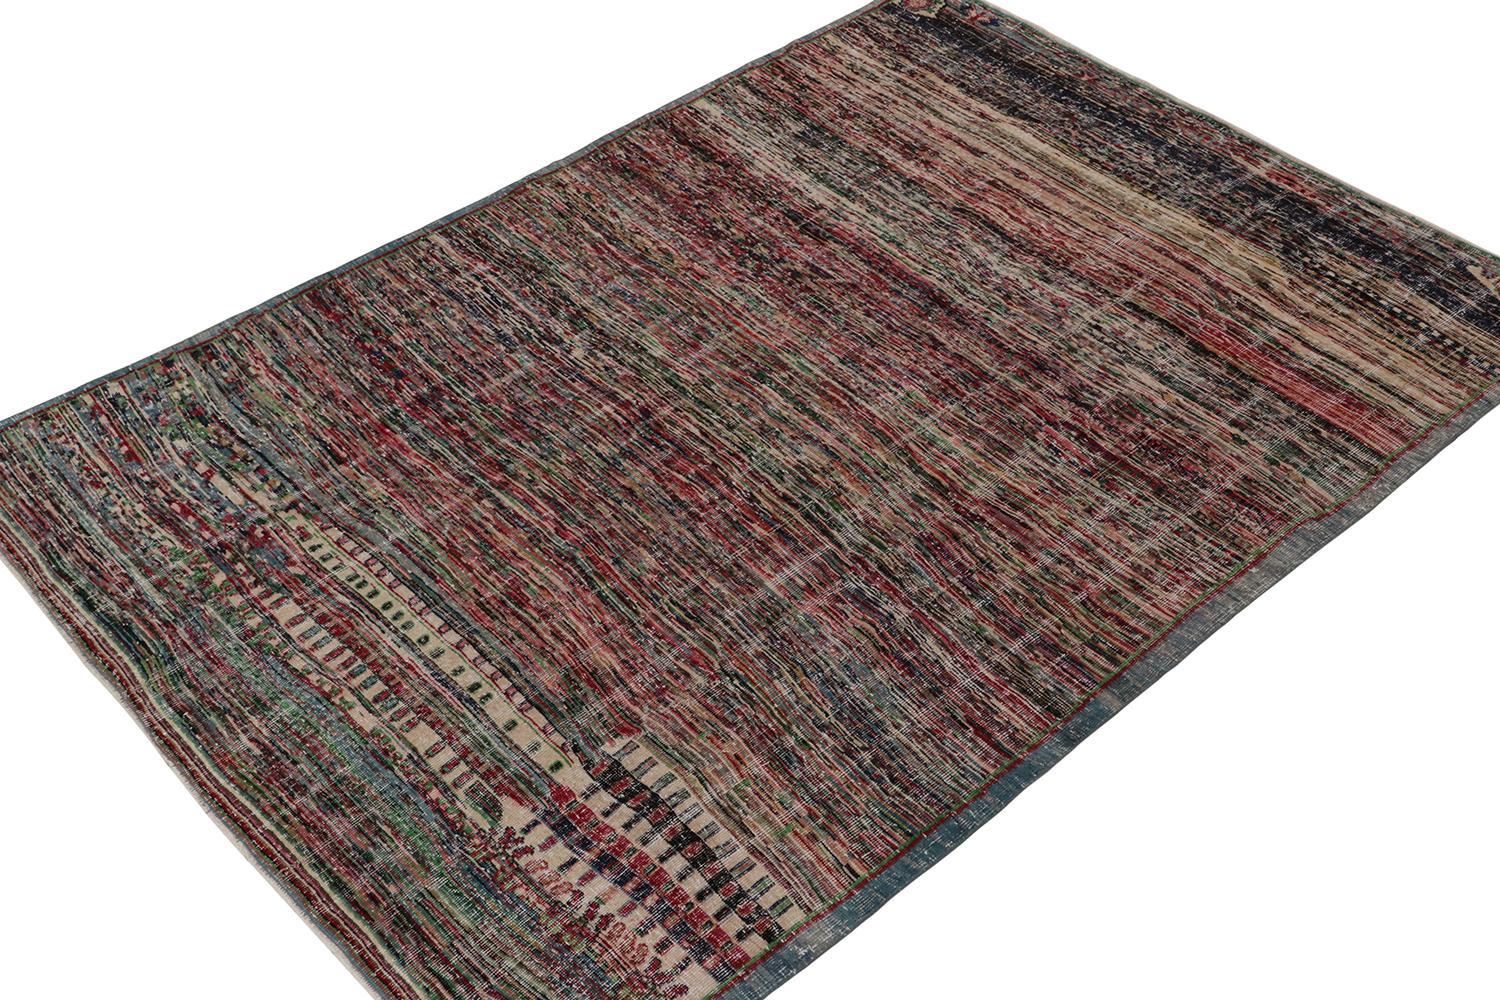 This vintage 7x9 rug is a new addition to Rug & Kilim’s mid-century Pasha Collection. This line is a commemoration, with rare curations we believe to hail from multidisciplinary Turkish designer Zeki Müren.

Further on the Design:

Amongst the rare